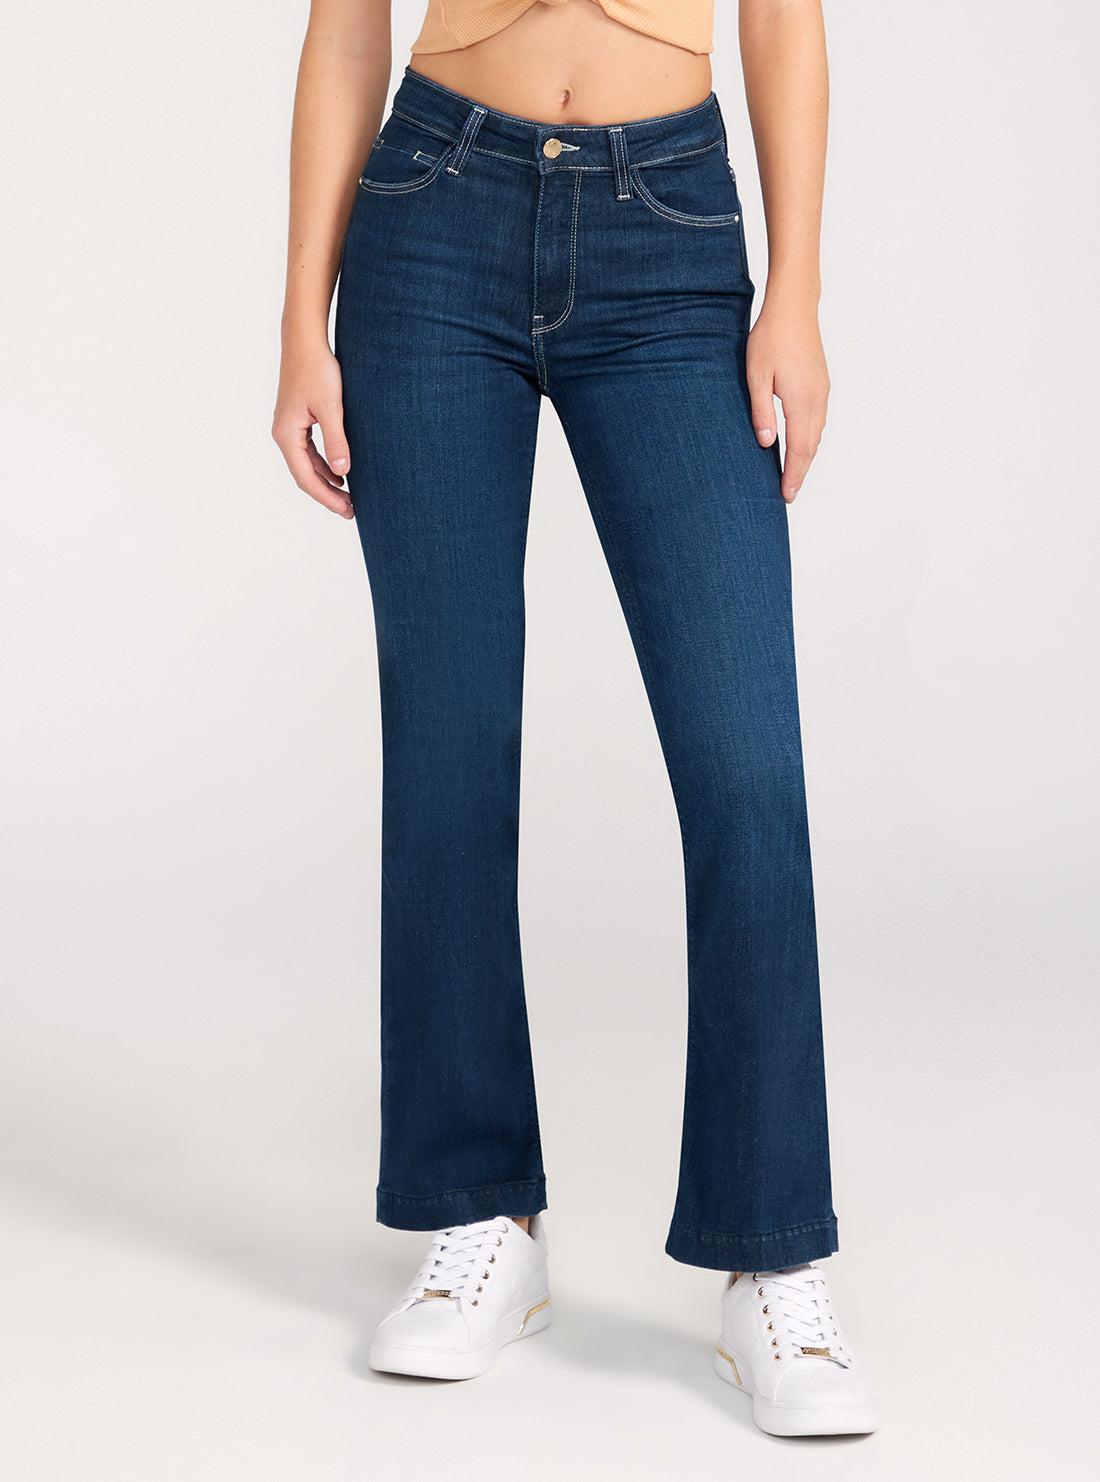 GUESS Mid-Rise Sexy Bootleg Cut Denim Jeans In Dark Wash front view